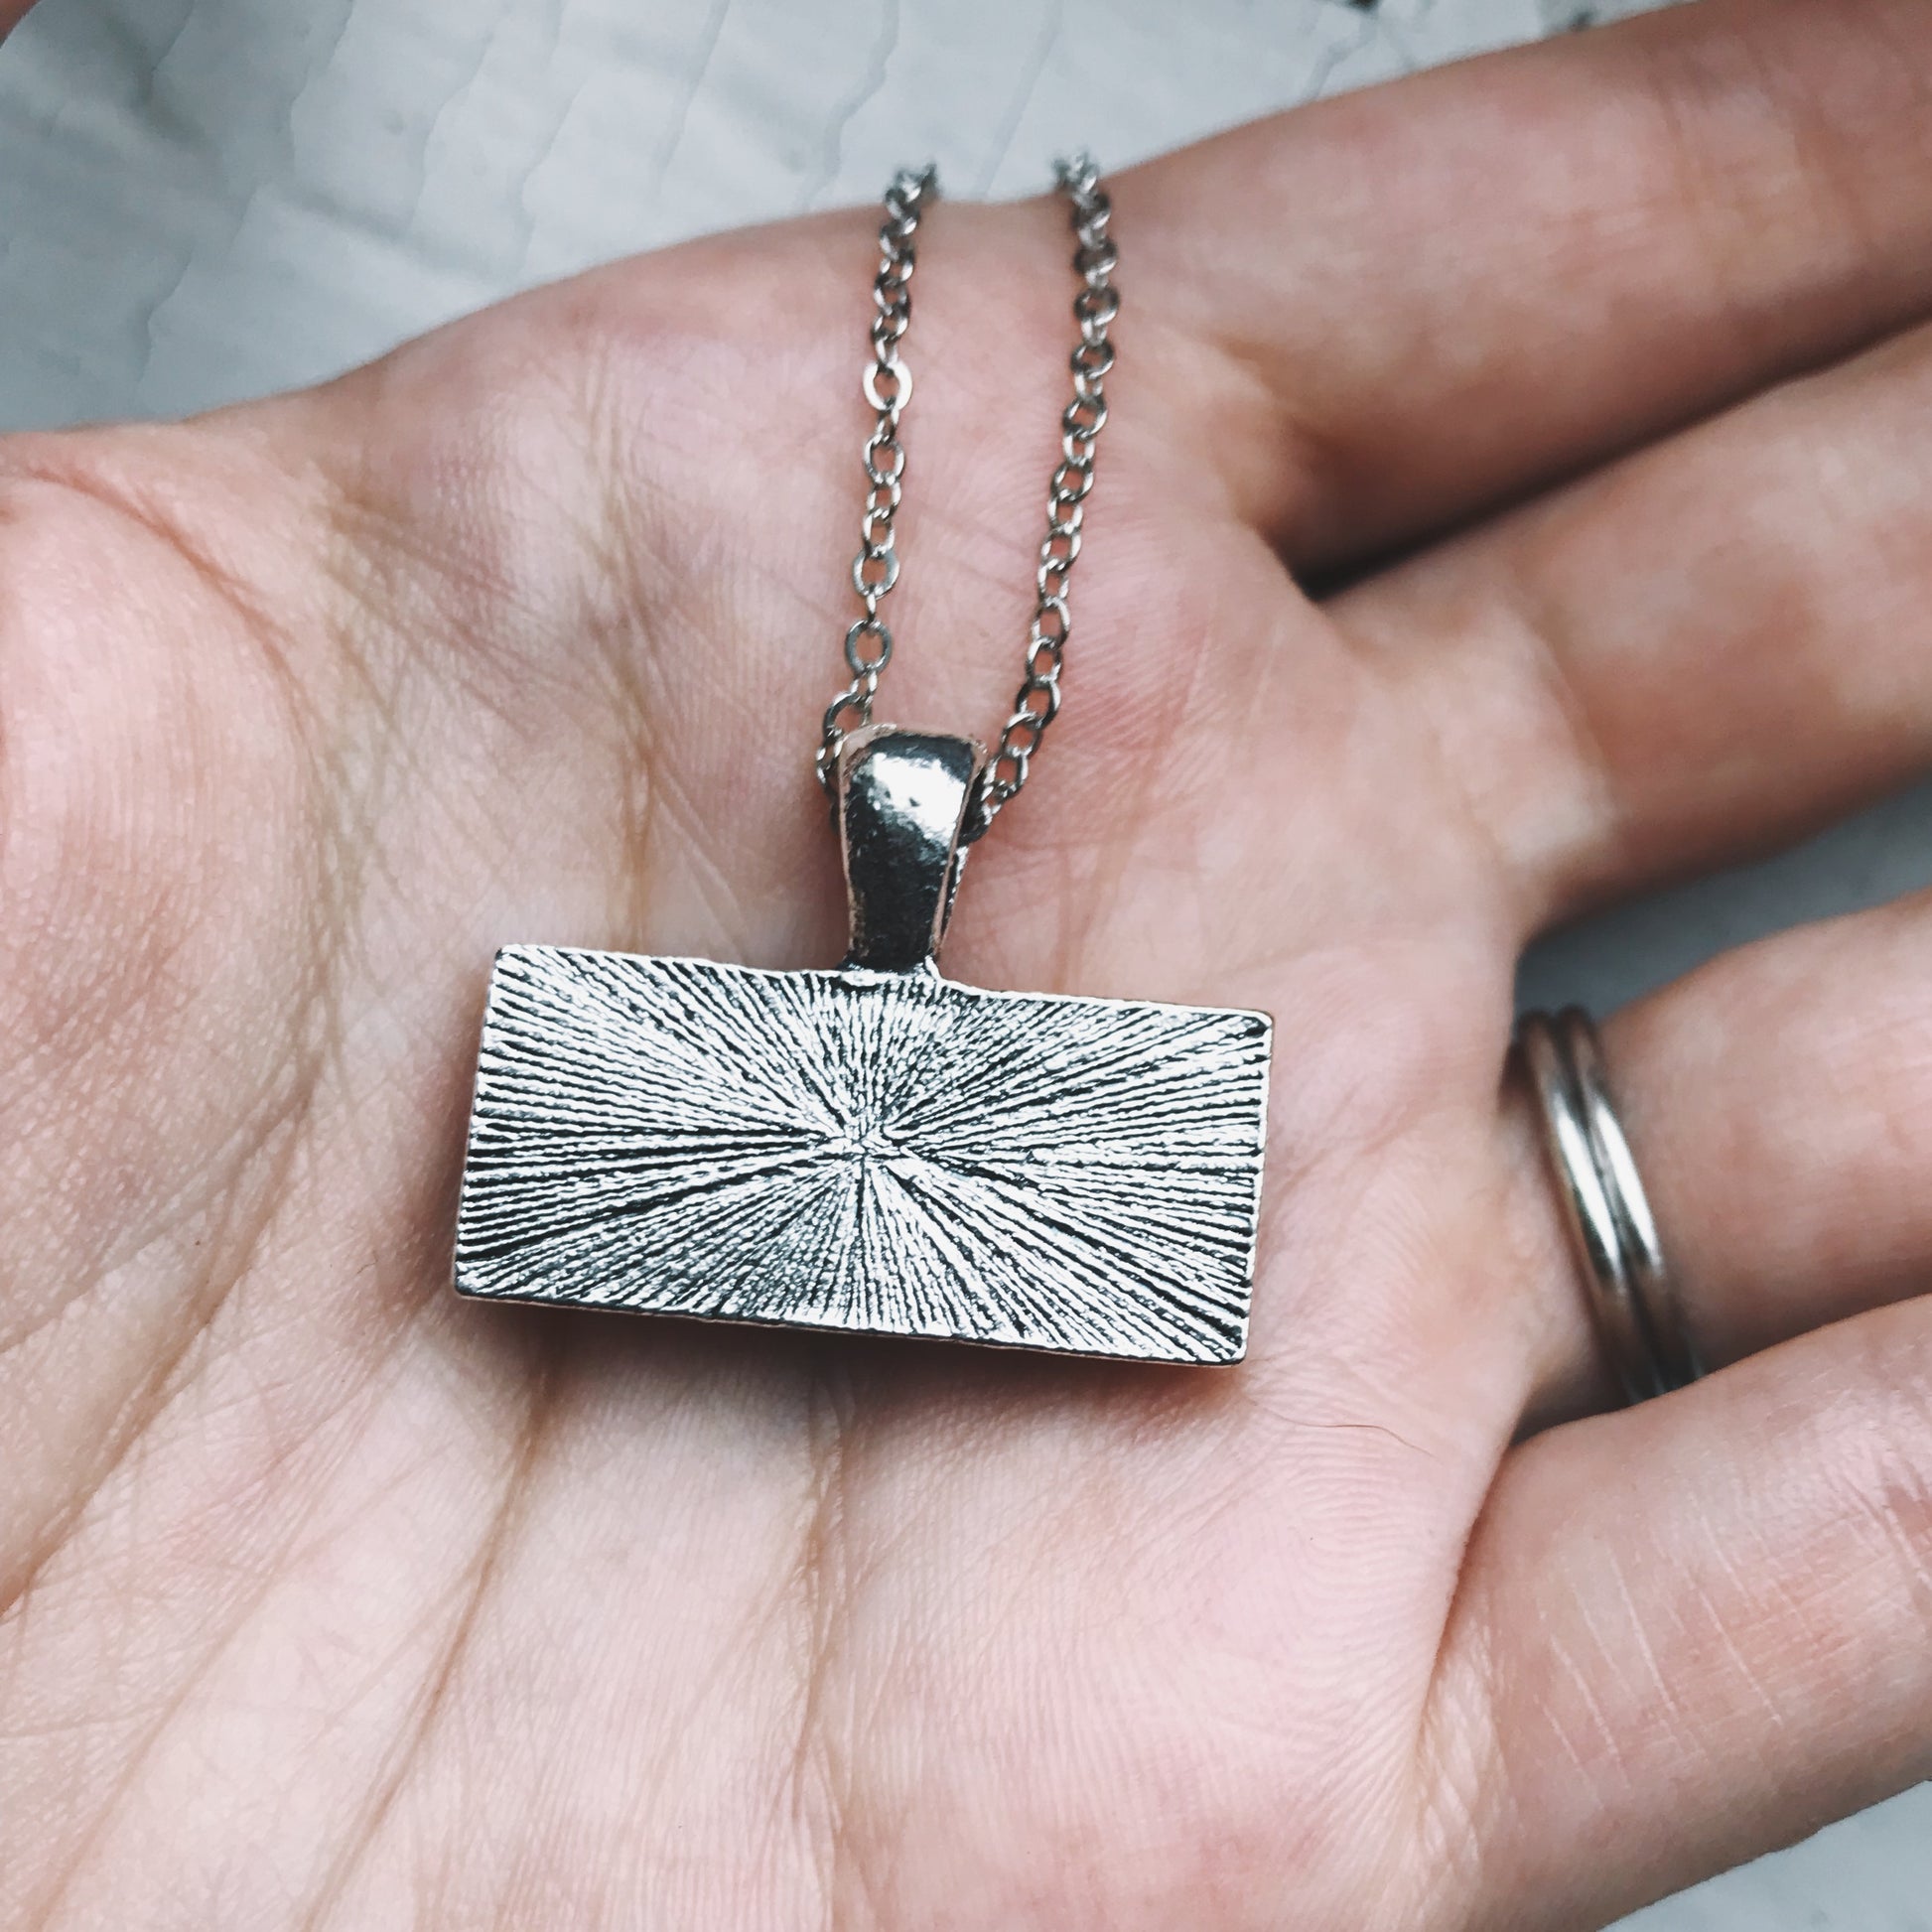 Planetary Society LightSail Rectangle Necklace - Sail Necklace Yugen Handmade   